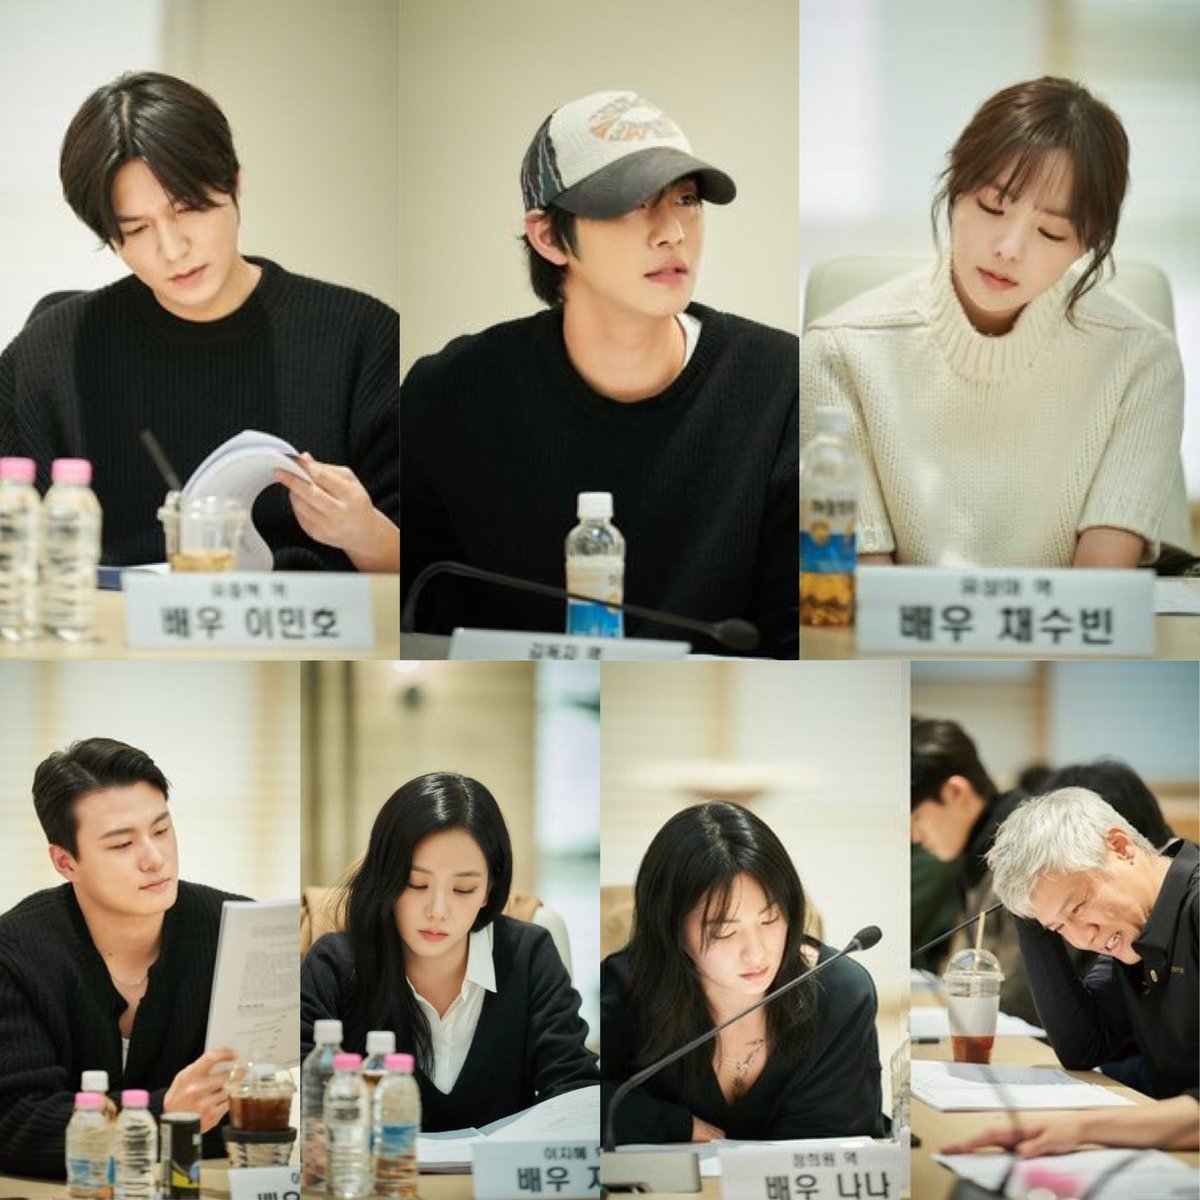 #OmniscientReader script reading still cuts

Dokja, who reads a novel, found out that the novel plot has become reality, As he knows how the story will turn, he will have to take charge and save the world.

 #LeeMinHo #AhnHyoSeop #ChaeSooBin #ShinSeungHo #Jisoo #Nana #ParkHoSan